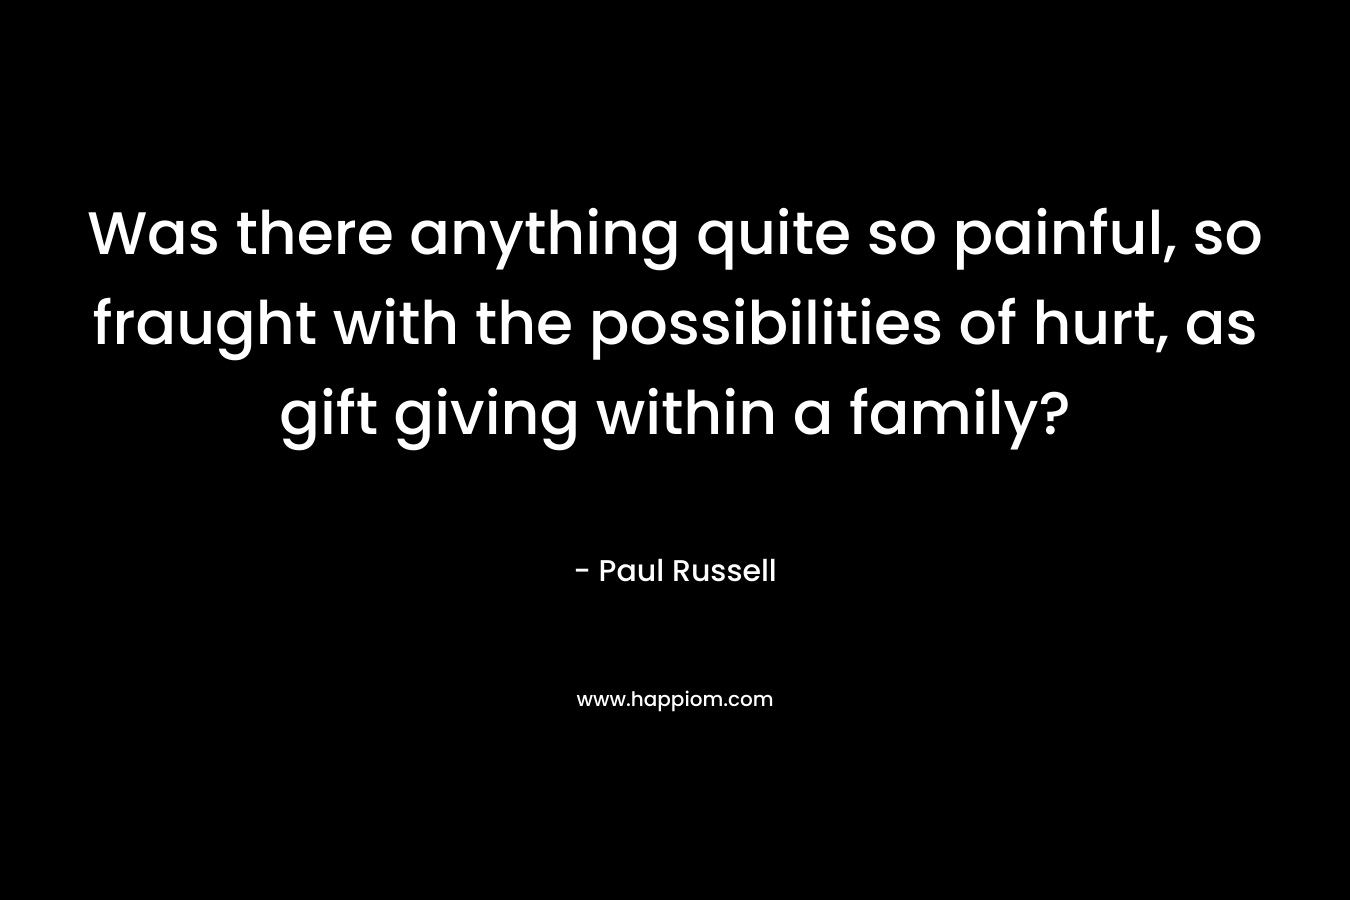 Was there anything quite so painful, so fraught with the possibilities of hurt, as gift giving within a family? – Paul Russell